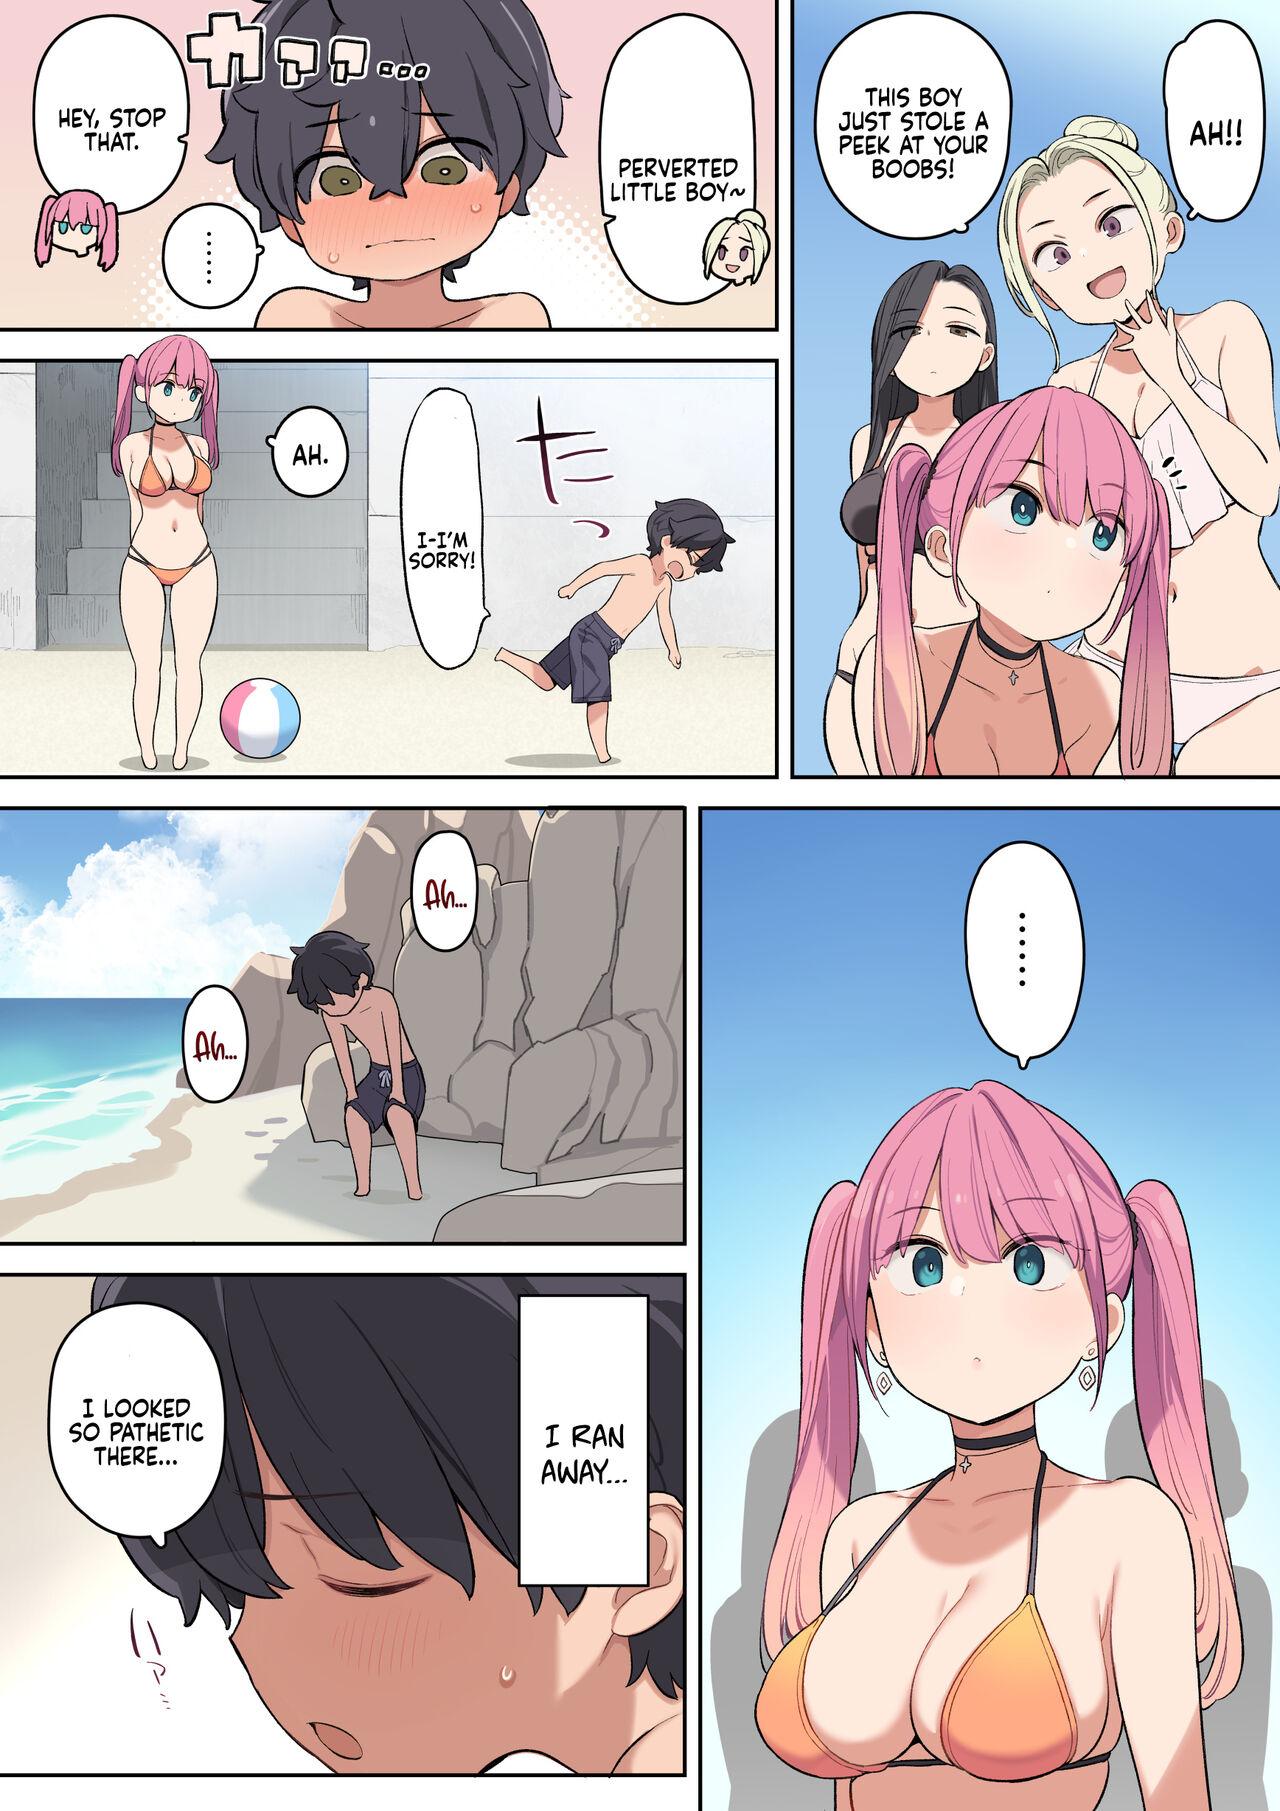 Swallowing Moshi Umibe de Ecchi na Onee-san to Deattara | If You Were to Meet A Sexy Lady at the Beach - Original Camporn - Page 5